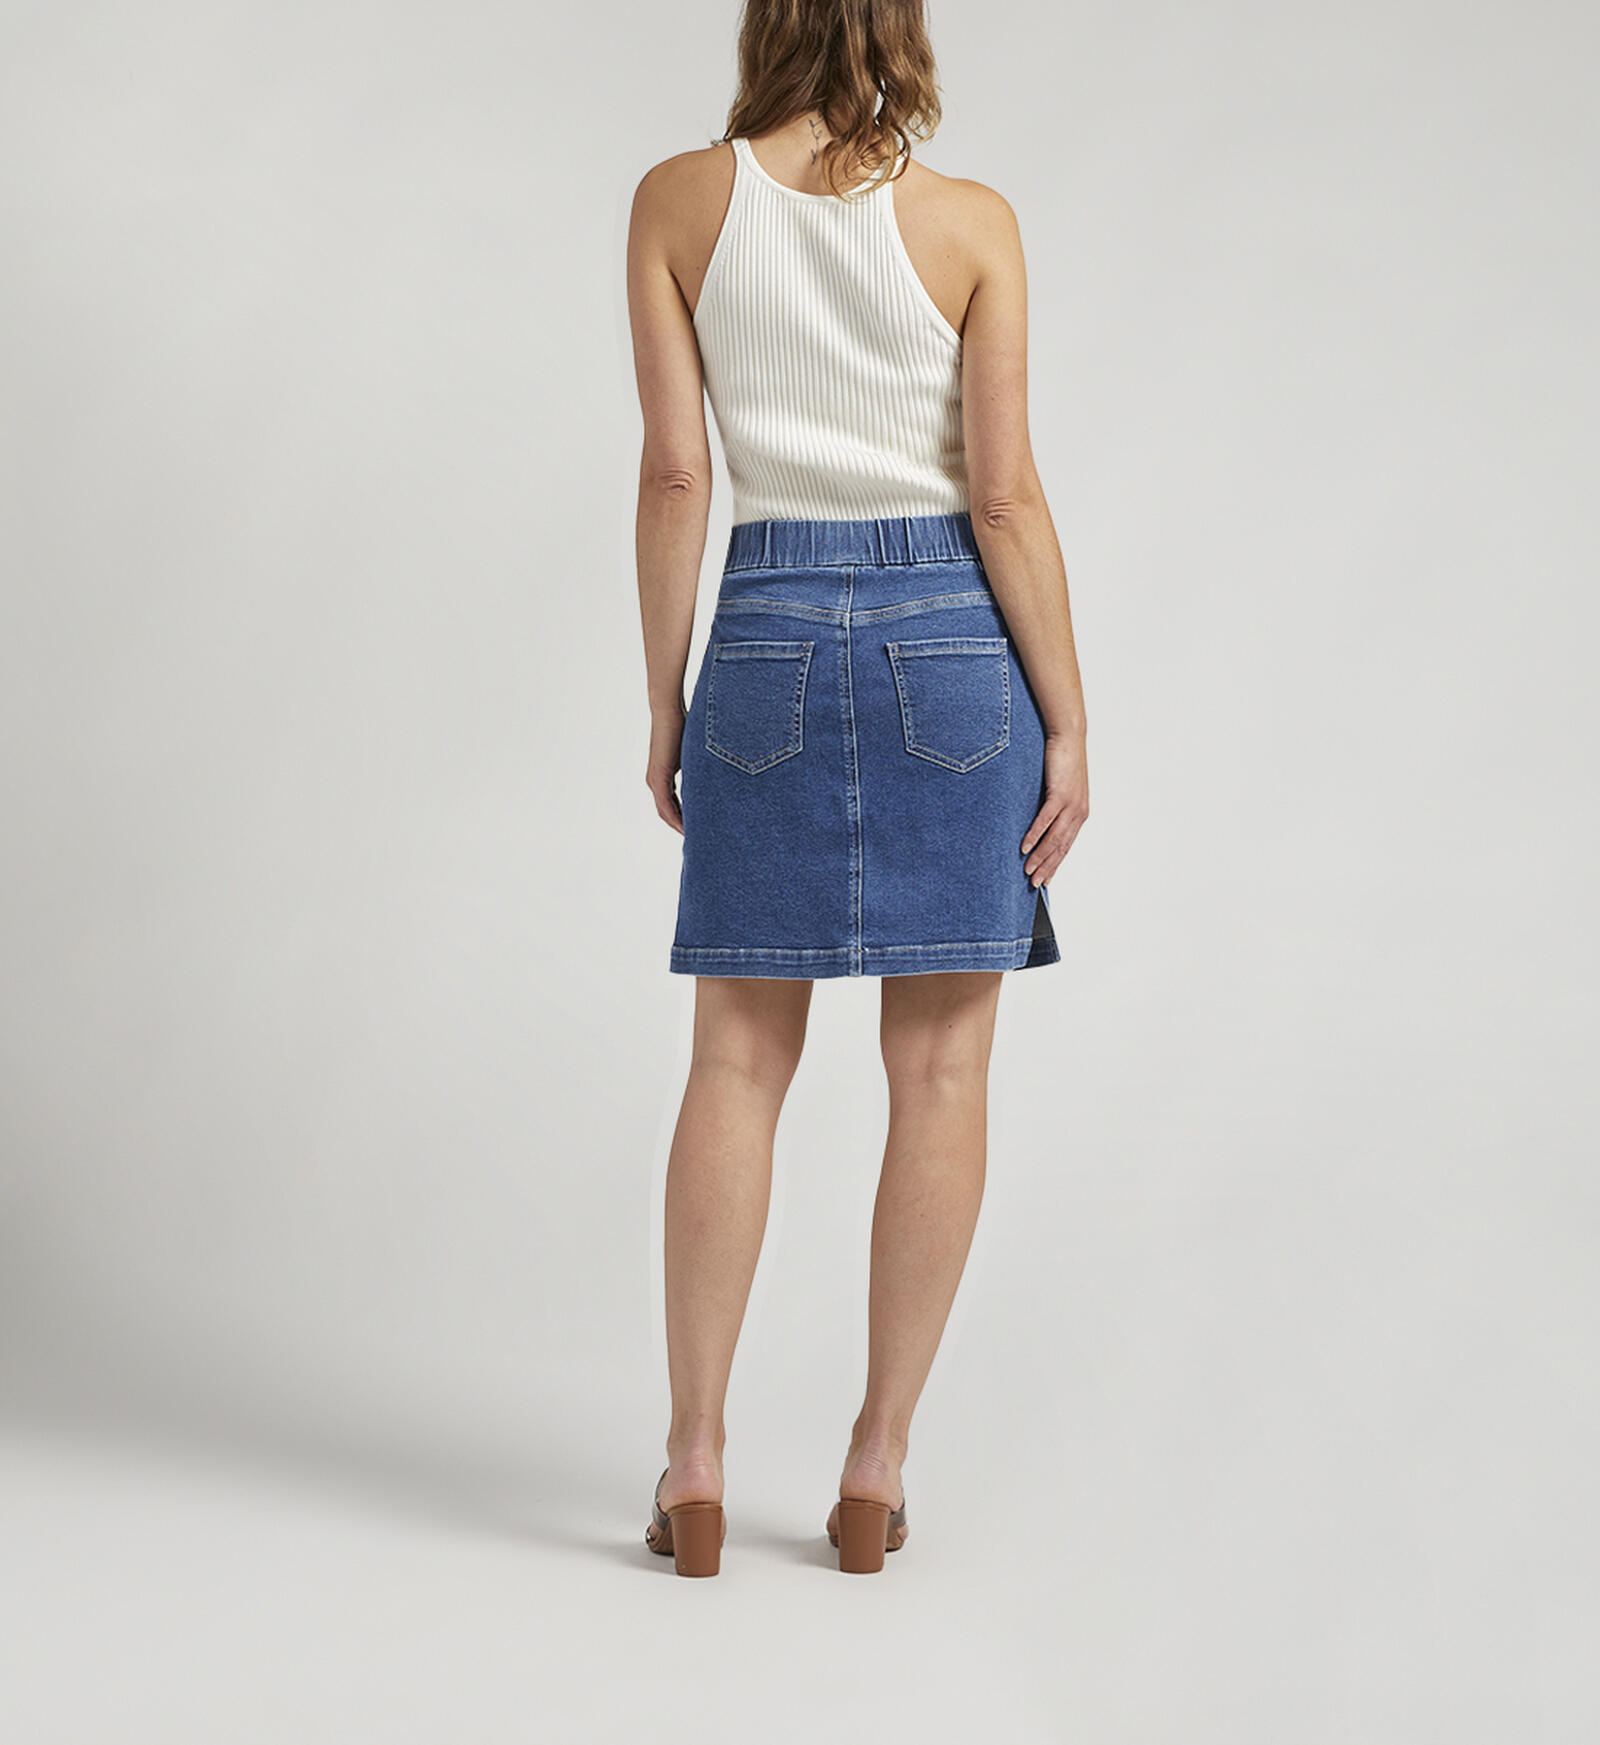 Buy On The Go Skort for USD 64.00 | Jag Jeans US New